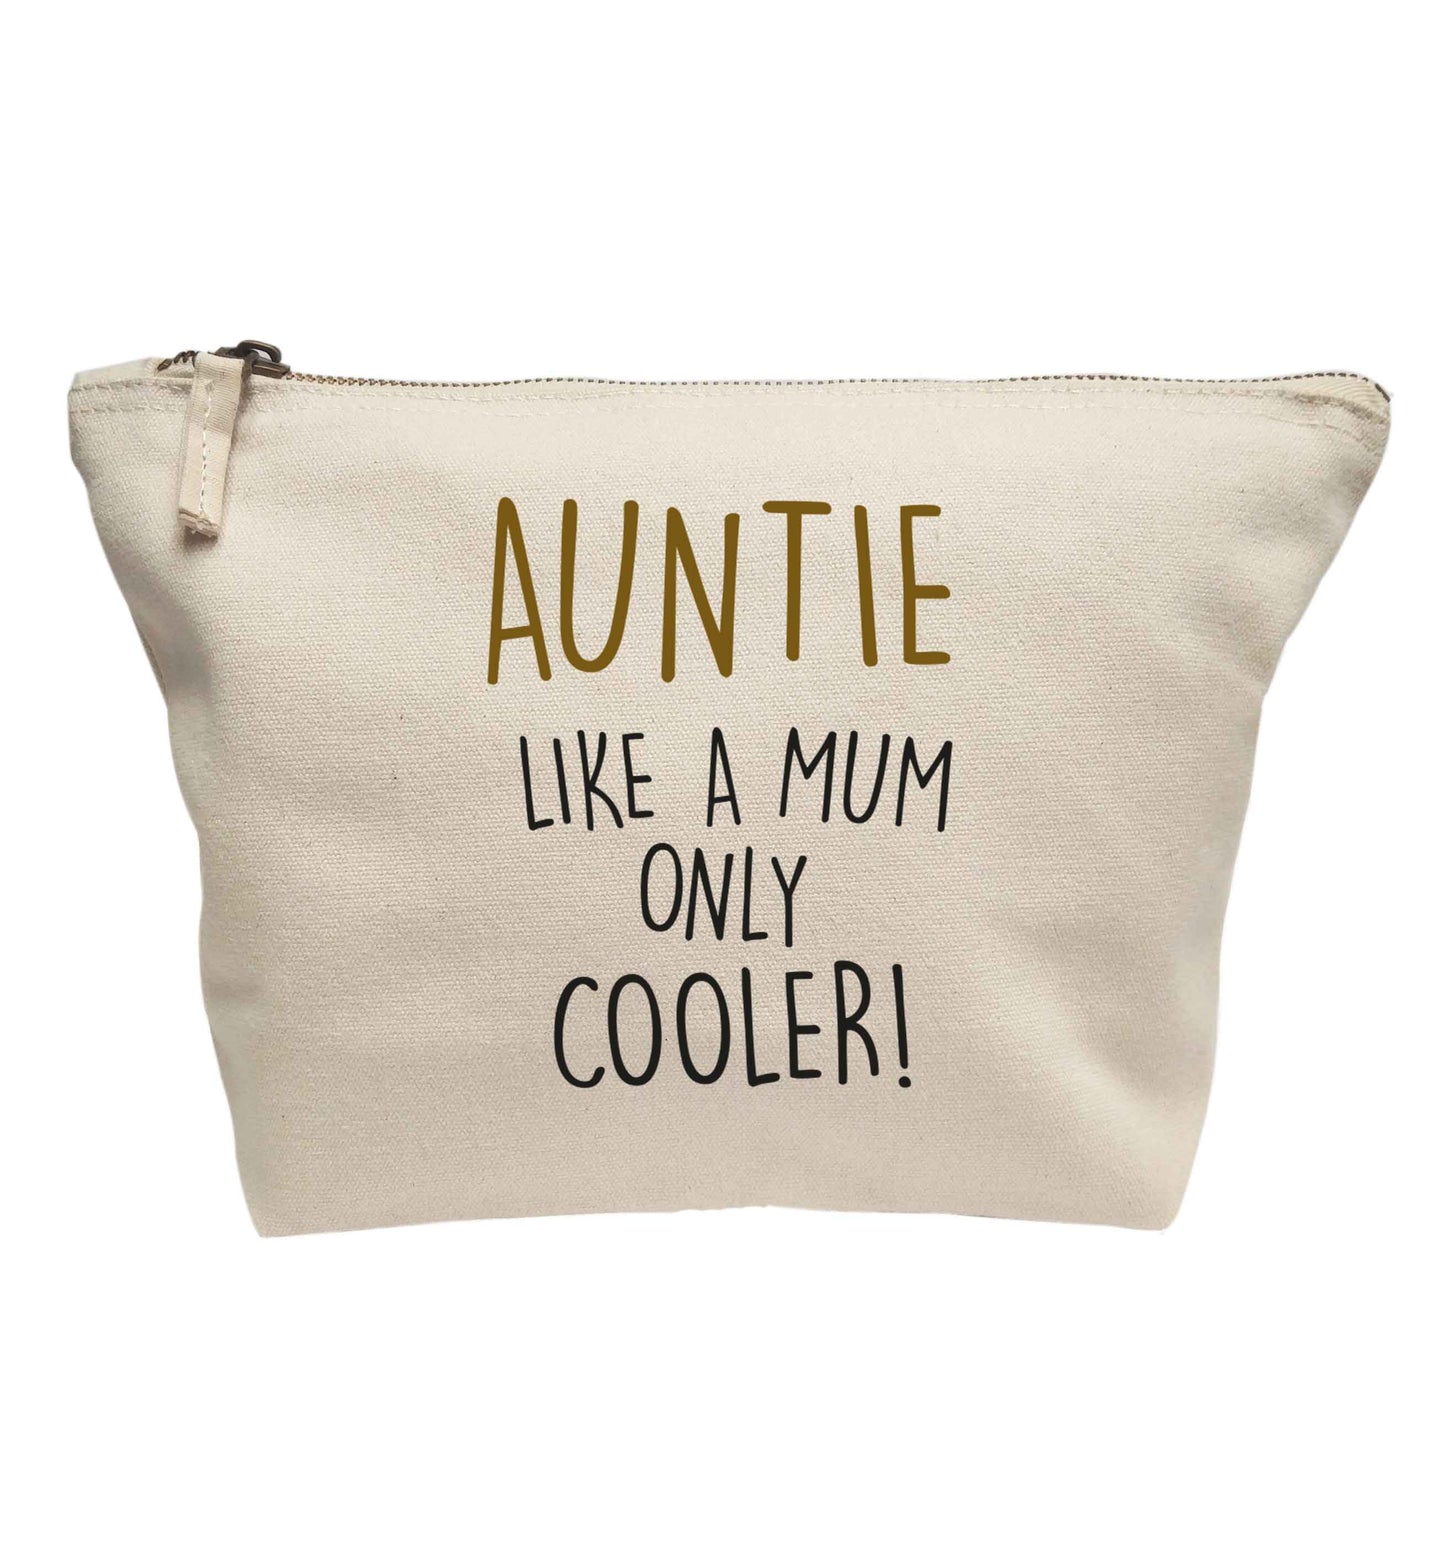 Auntie like a mum only cooler | Makeup / wash bag